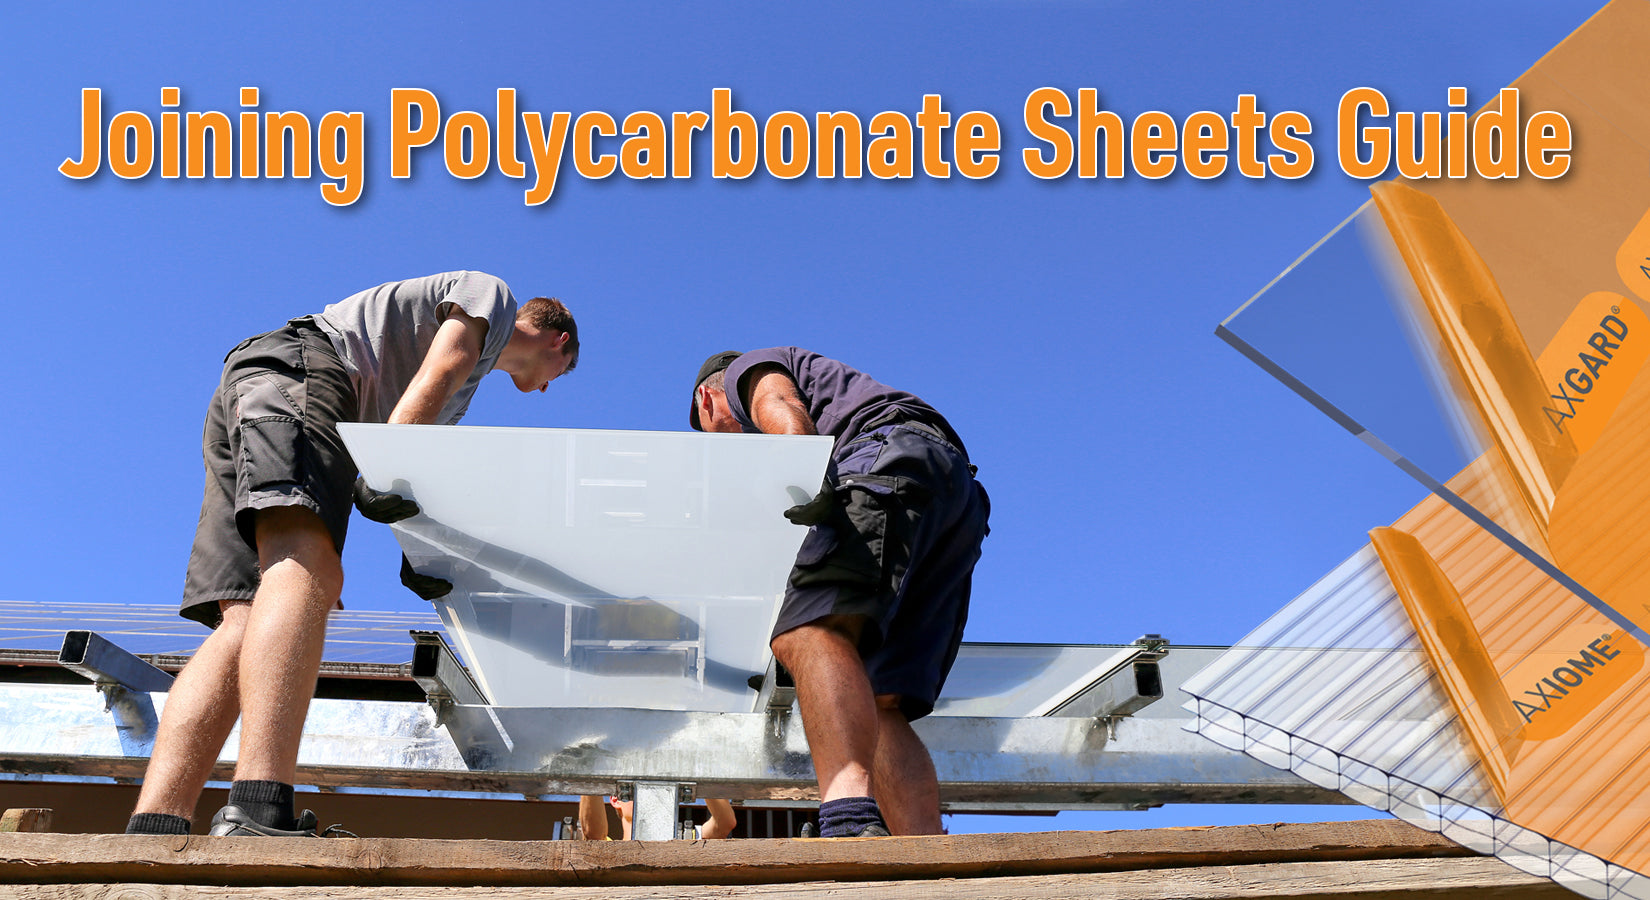 Polycarbonate Sheets in DIY Home Projects